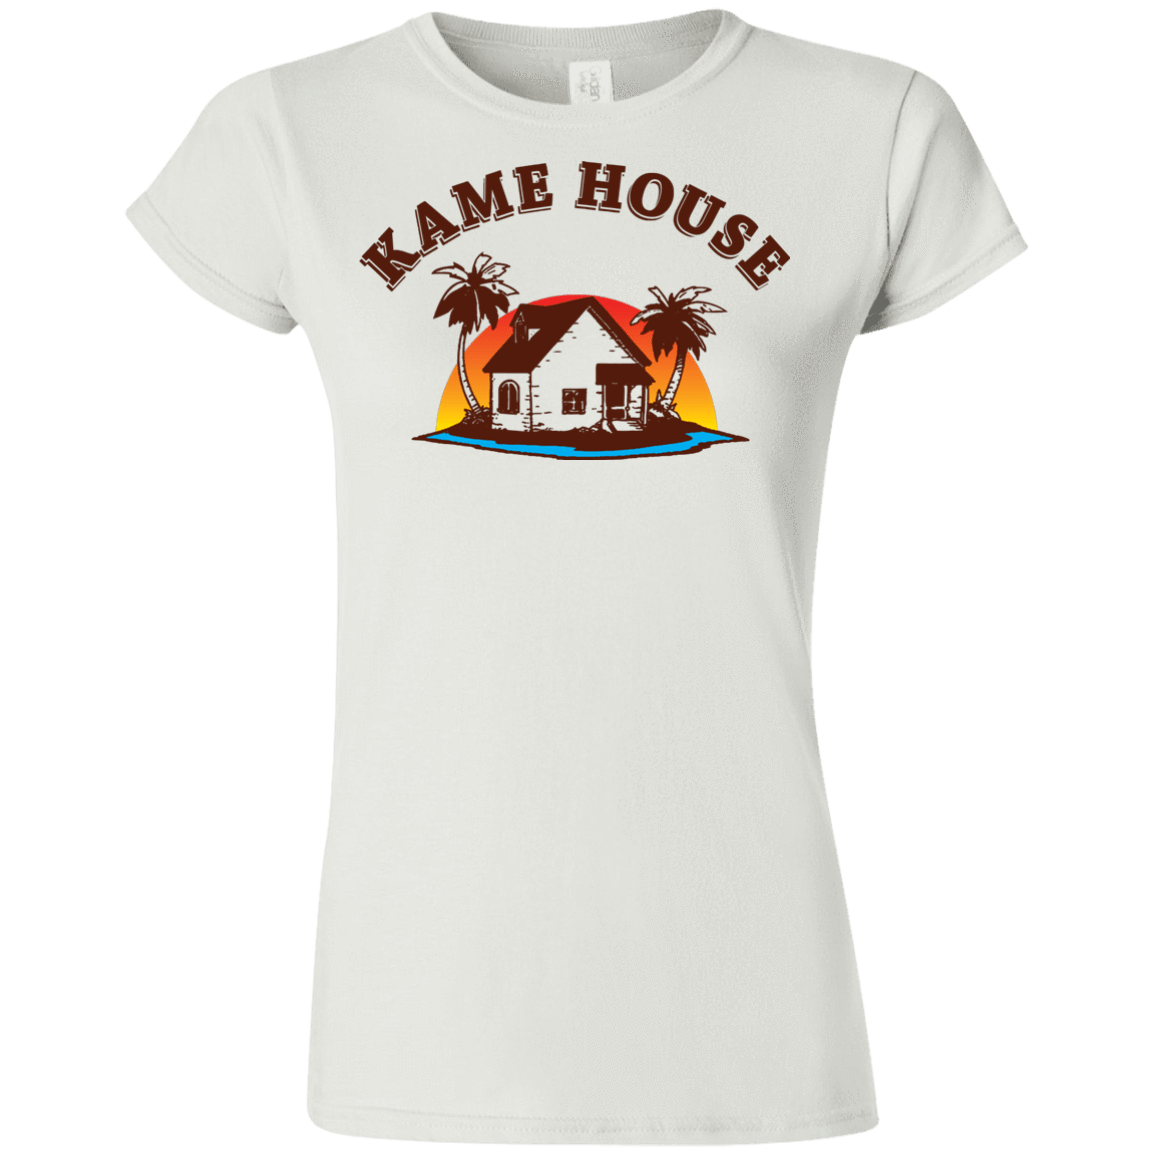 T-Shirts White / S Kame House Junior Slimmer-Fit T-Shirt